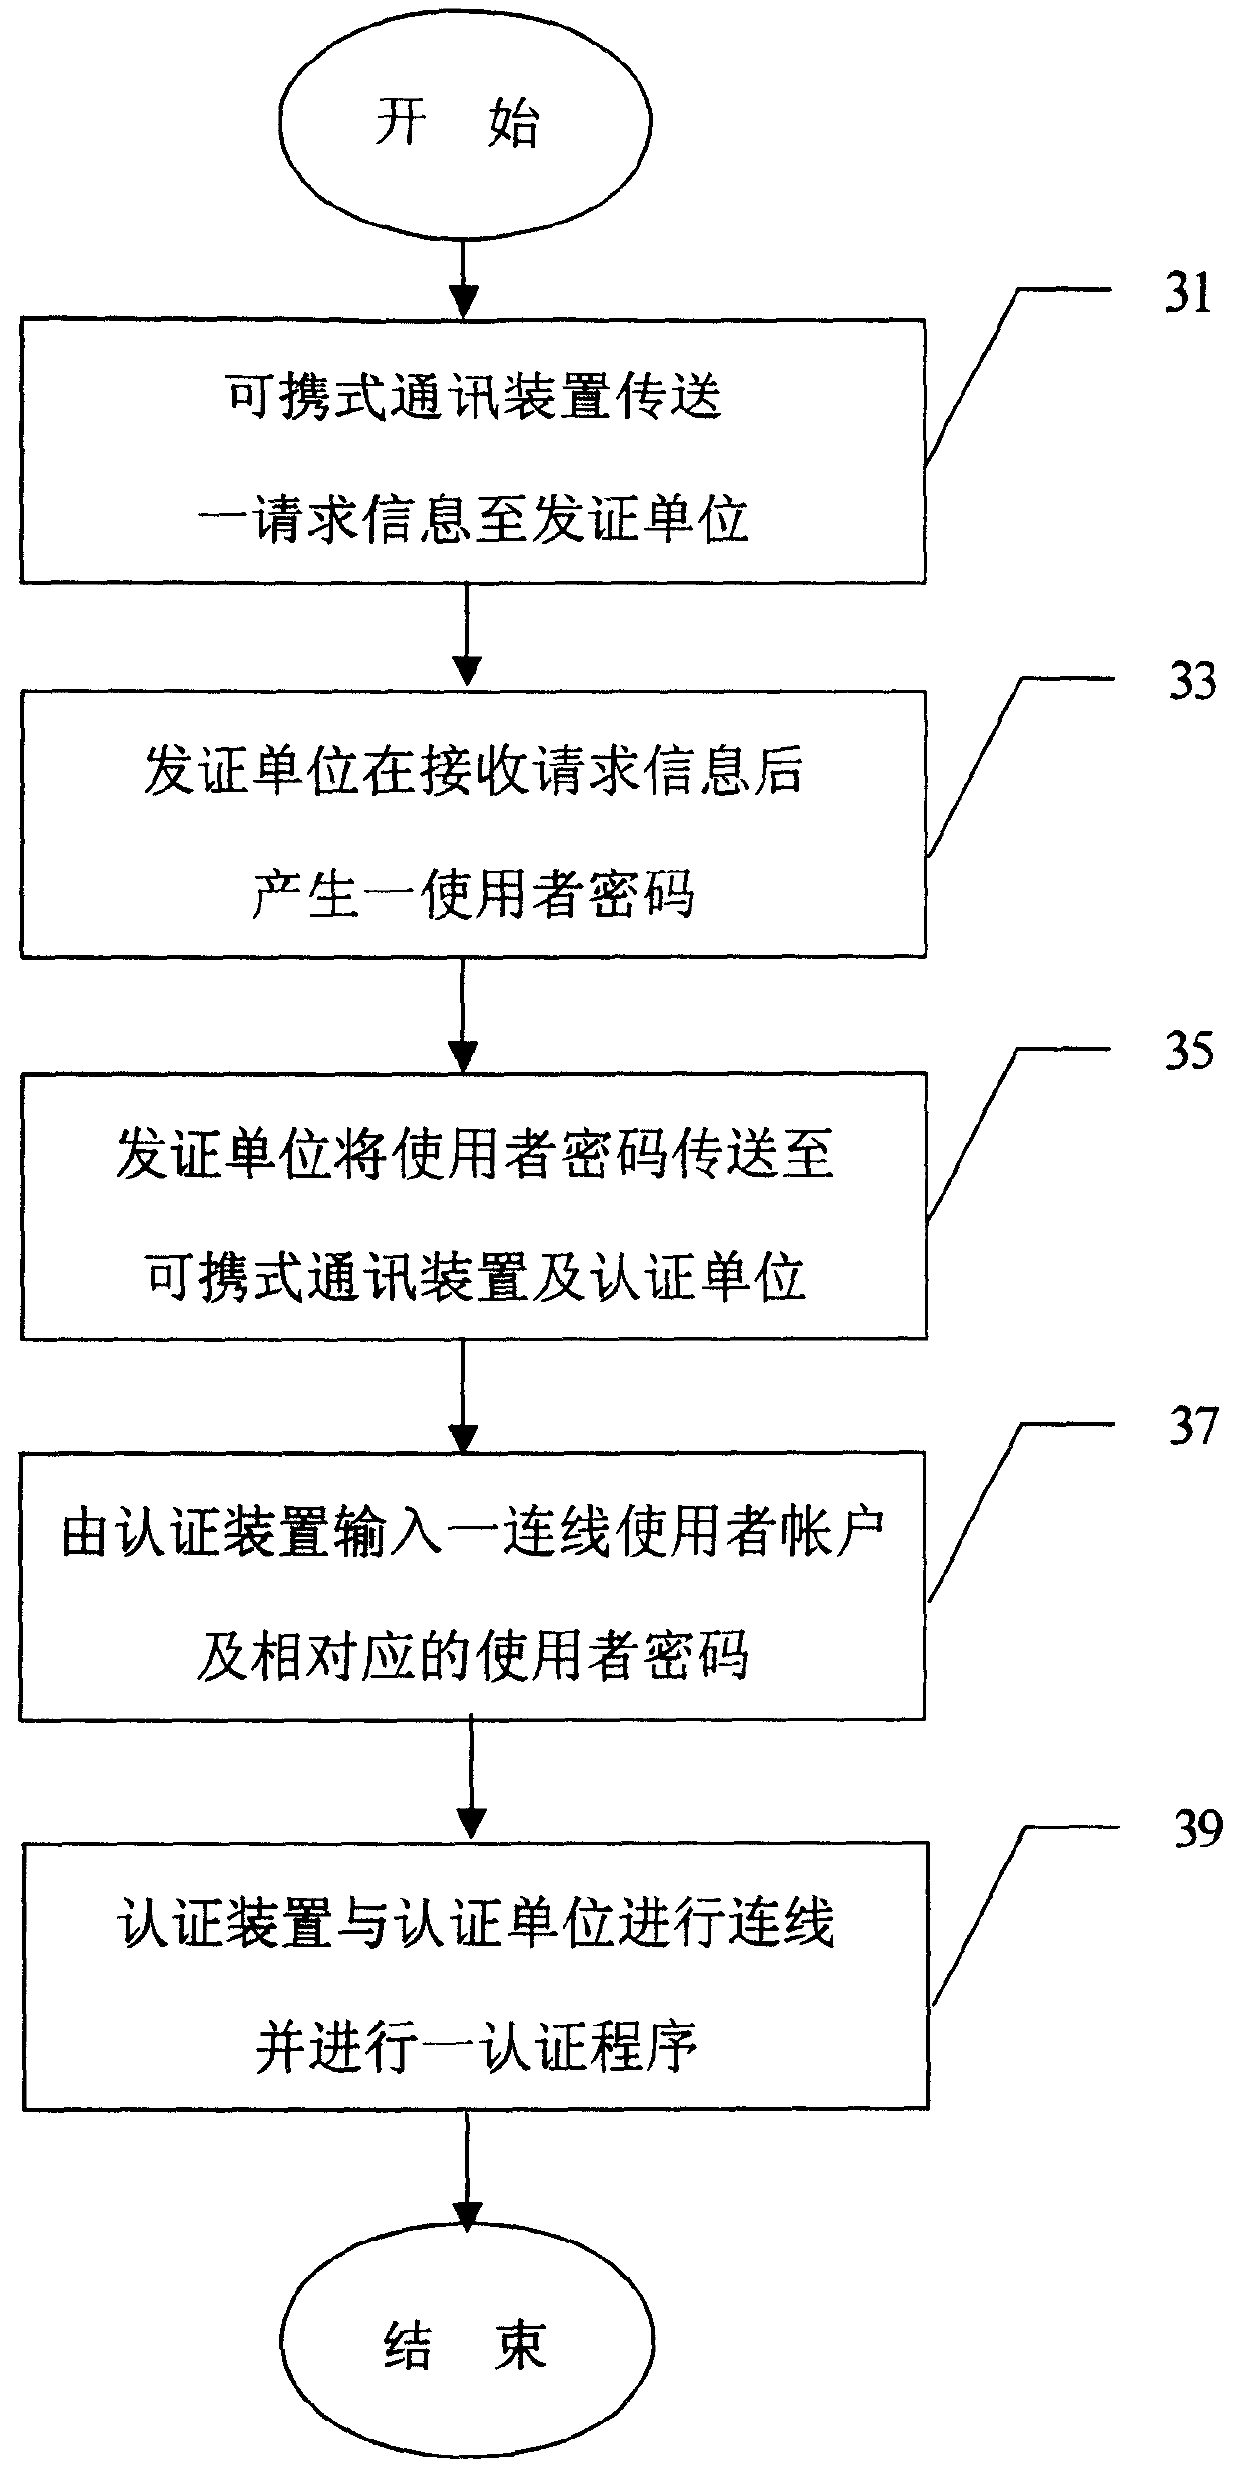 Account management system and method with secret function